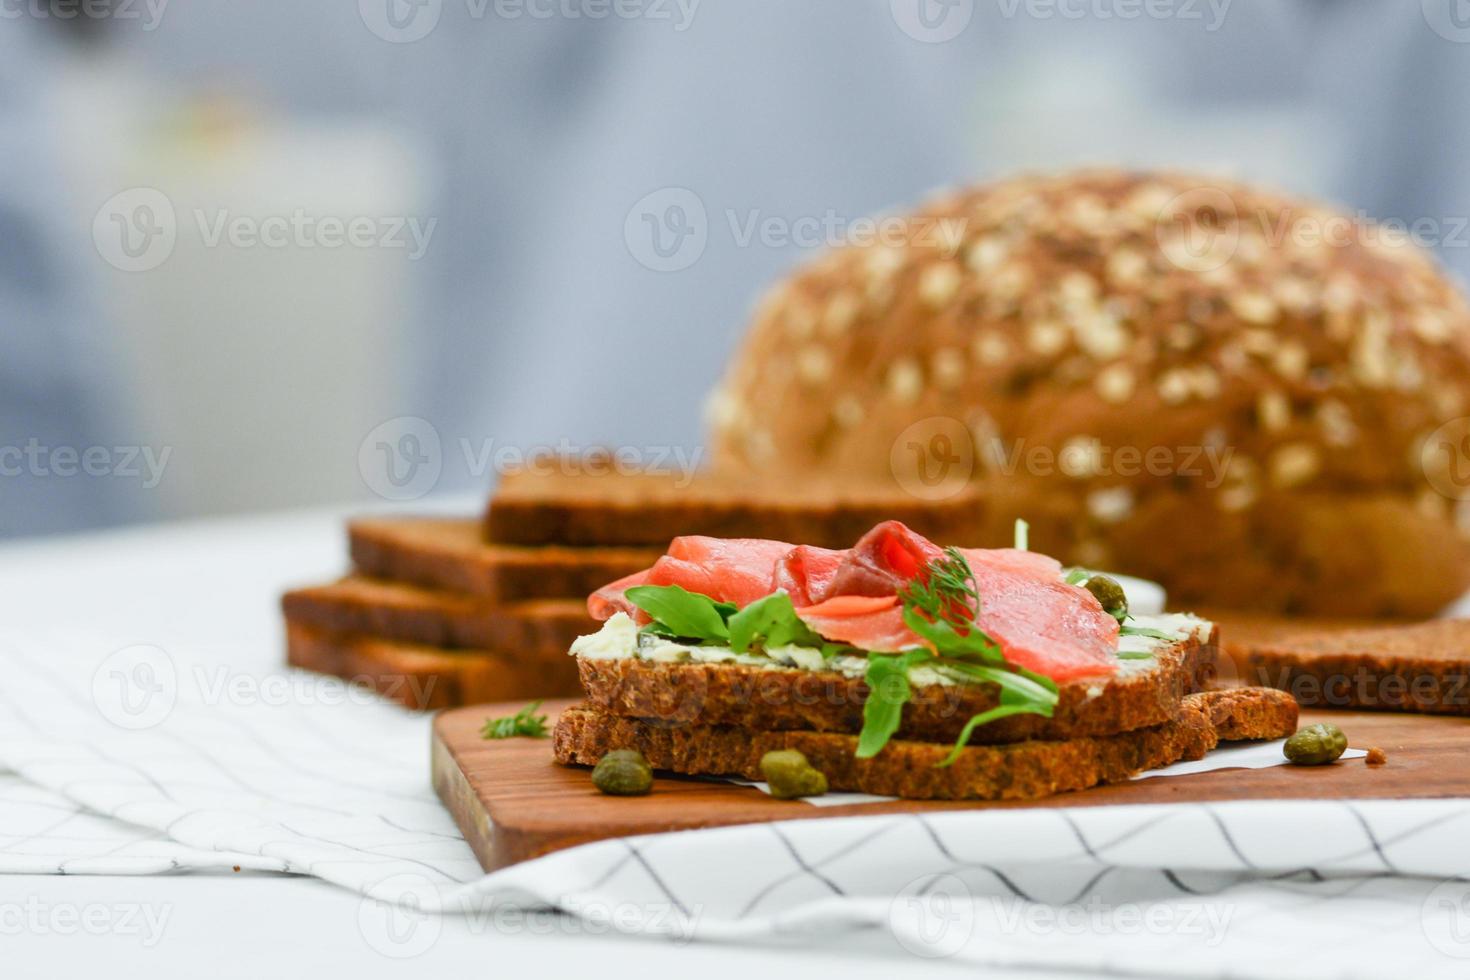 Smoked salmon sandwich with cheese, pistachio and salad leaves, brown breads photo